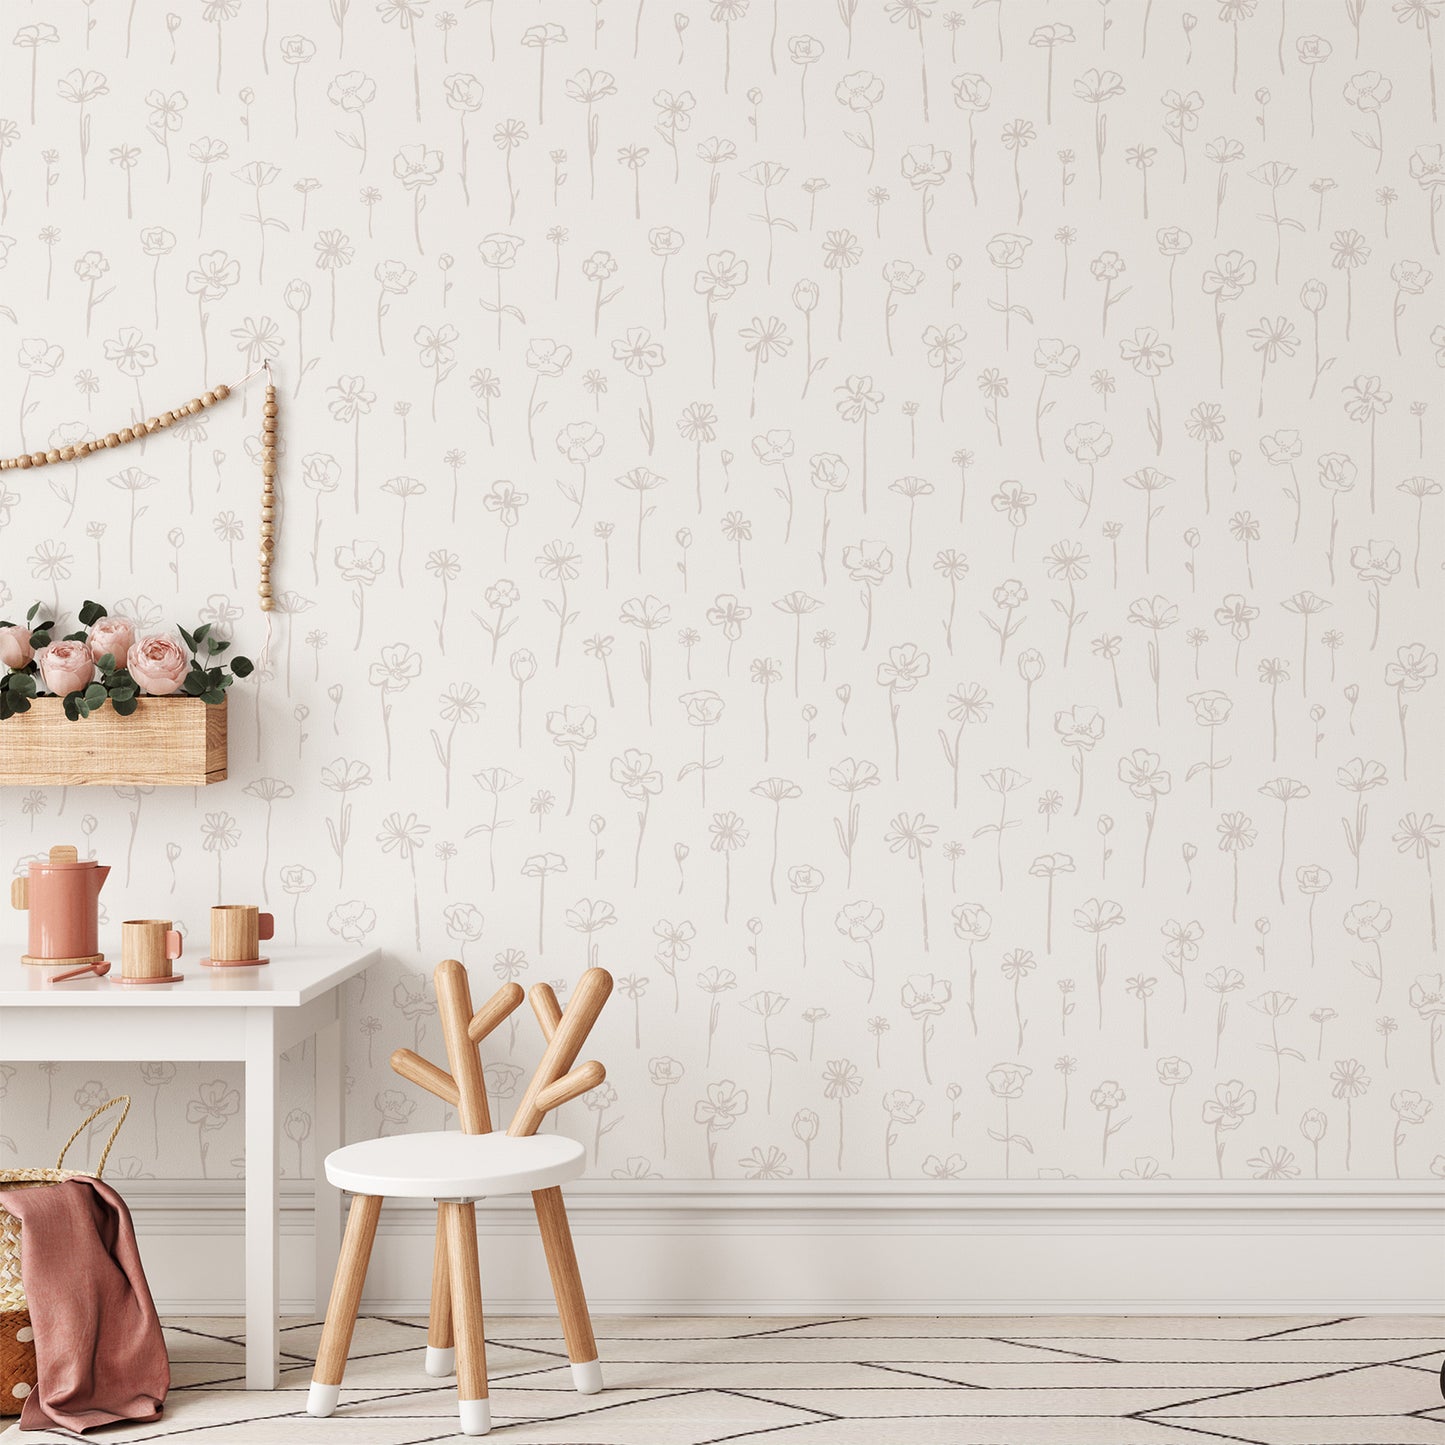 Wallpaper panel cNursery and Playroom featuring Lila's Floral Stems- a feminine dainty floral pattern